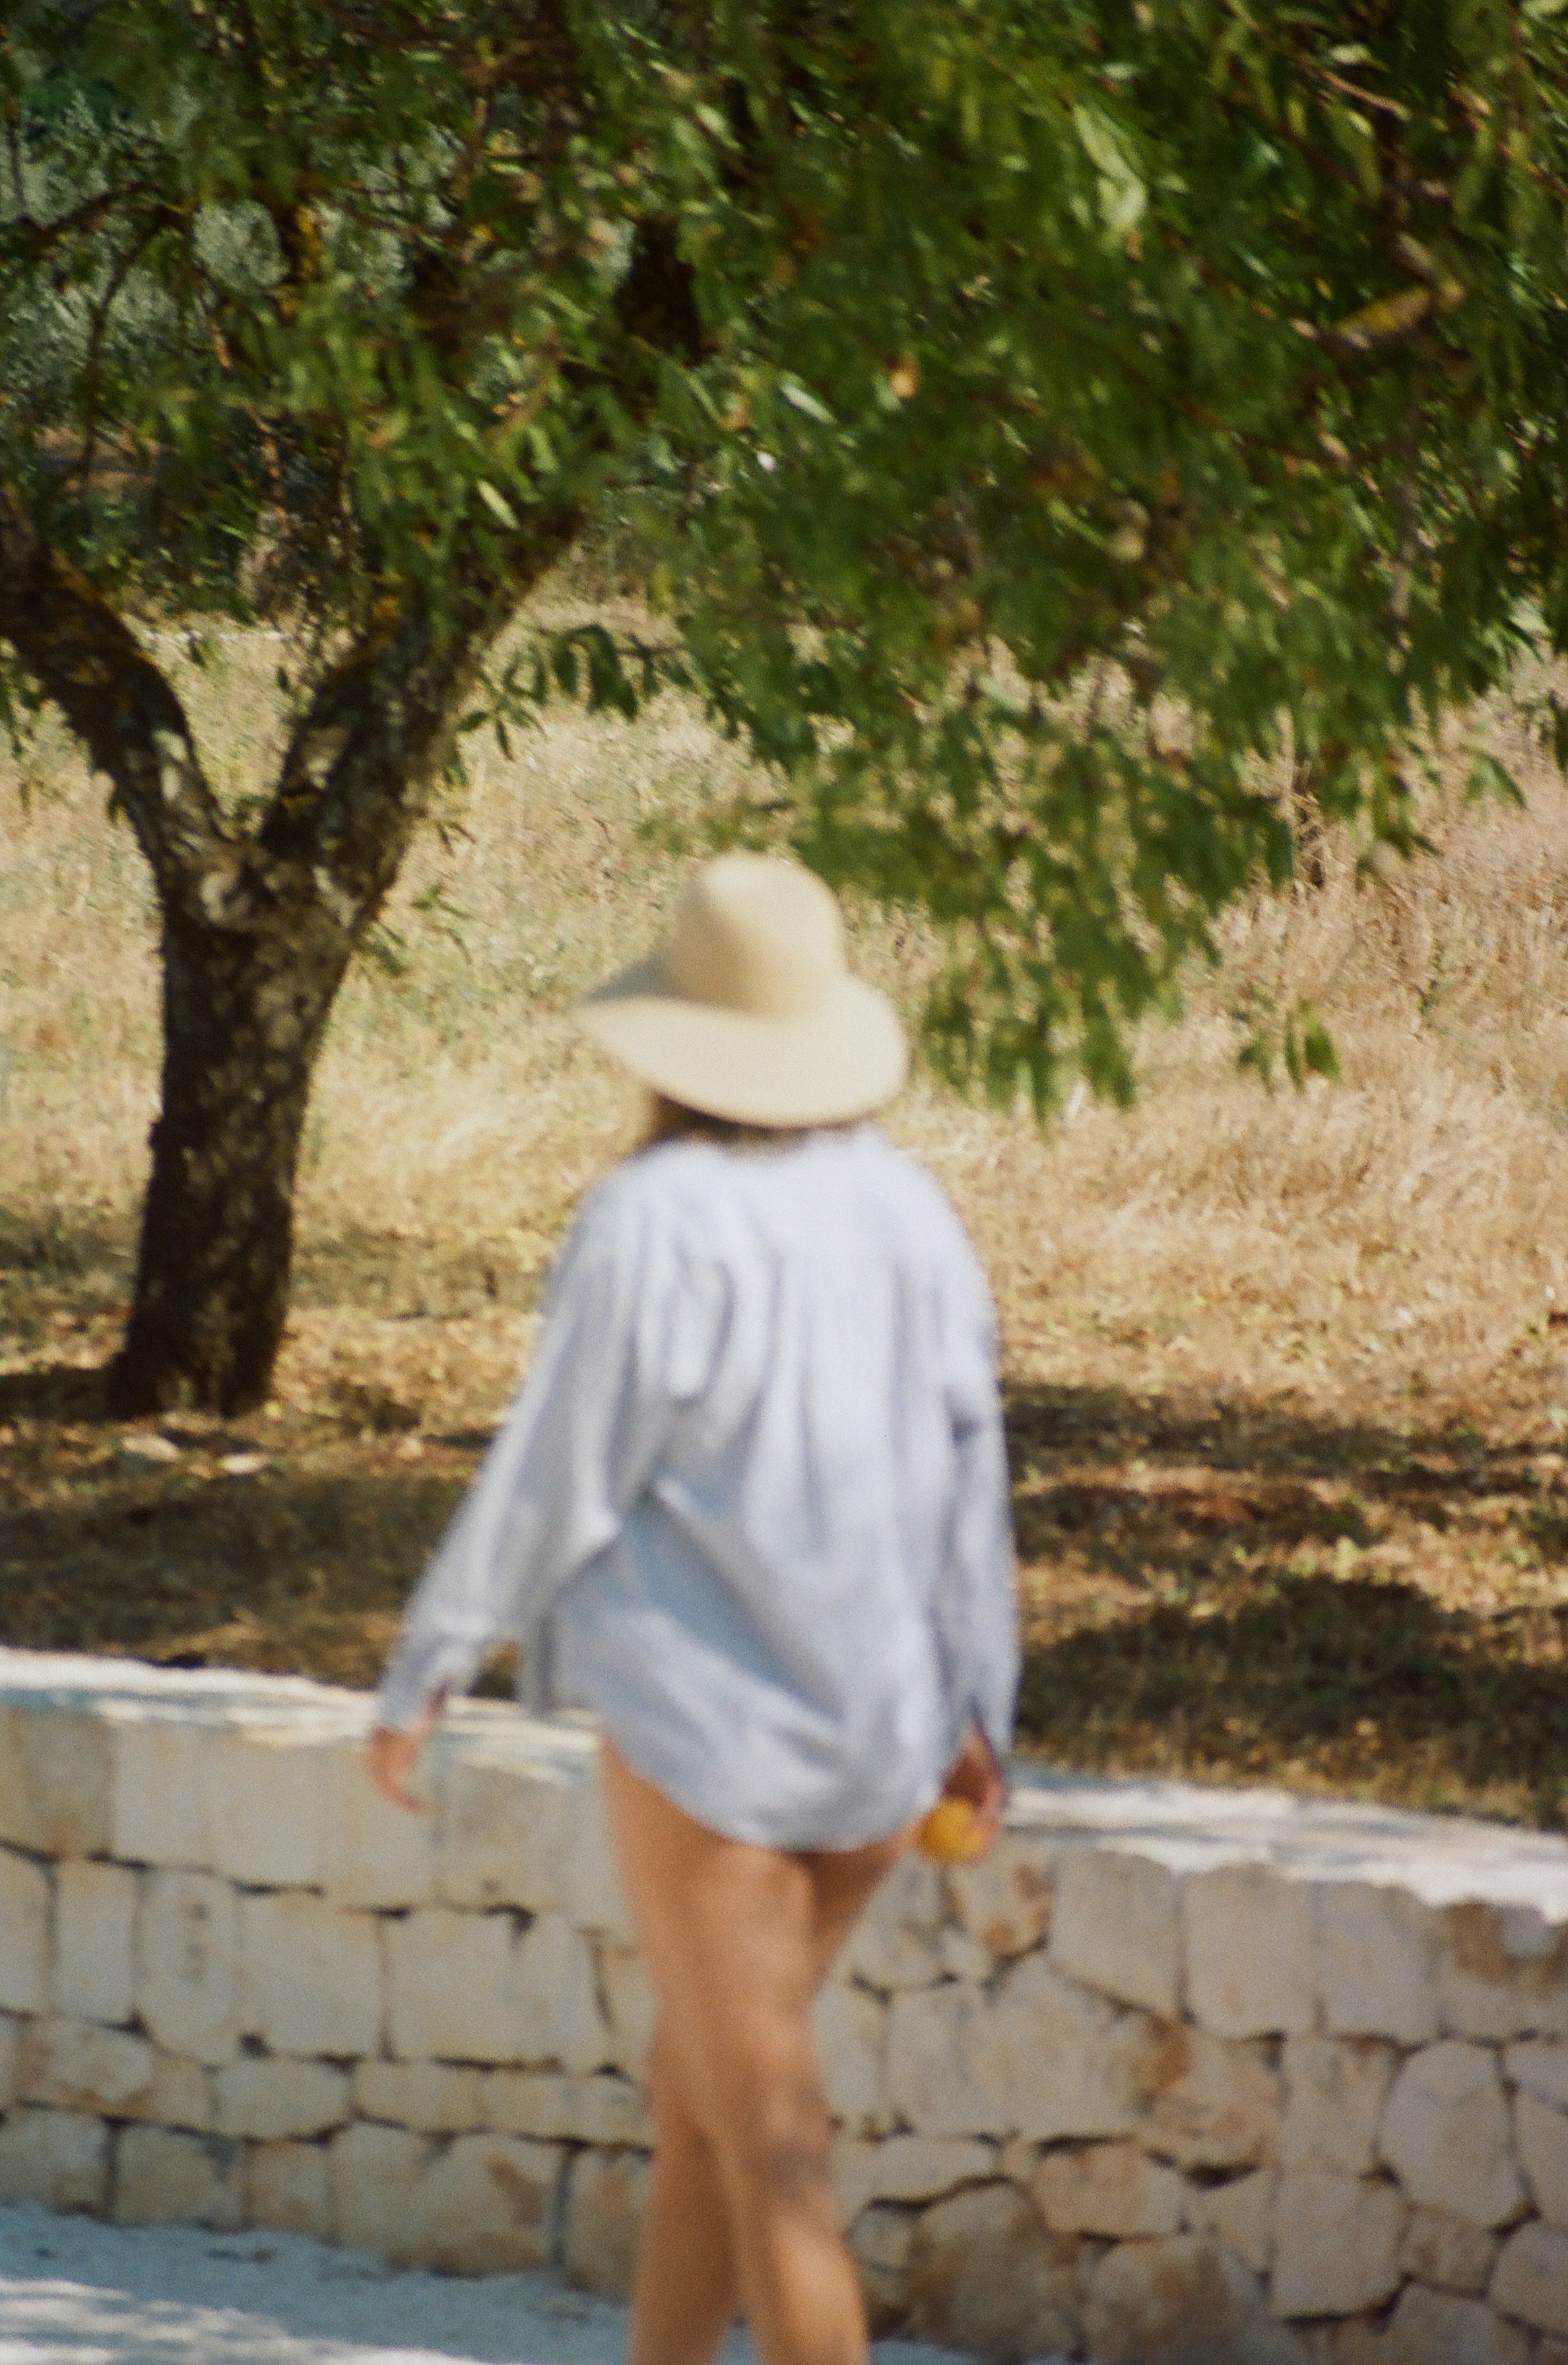 a person wearing a hat and walking by a tree